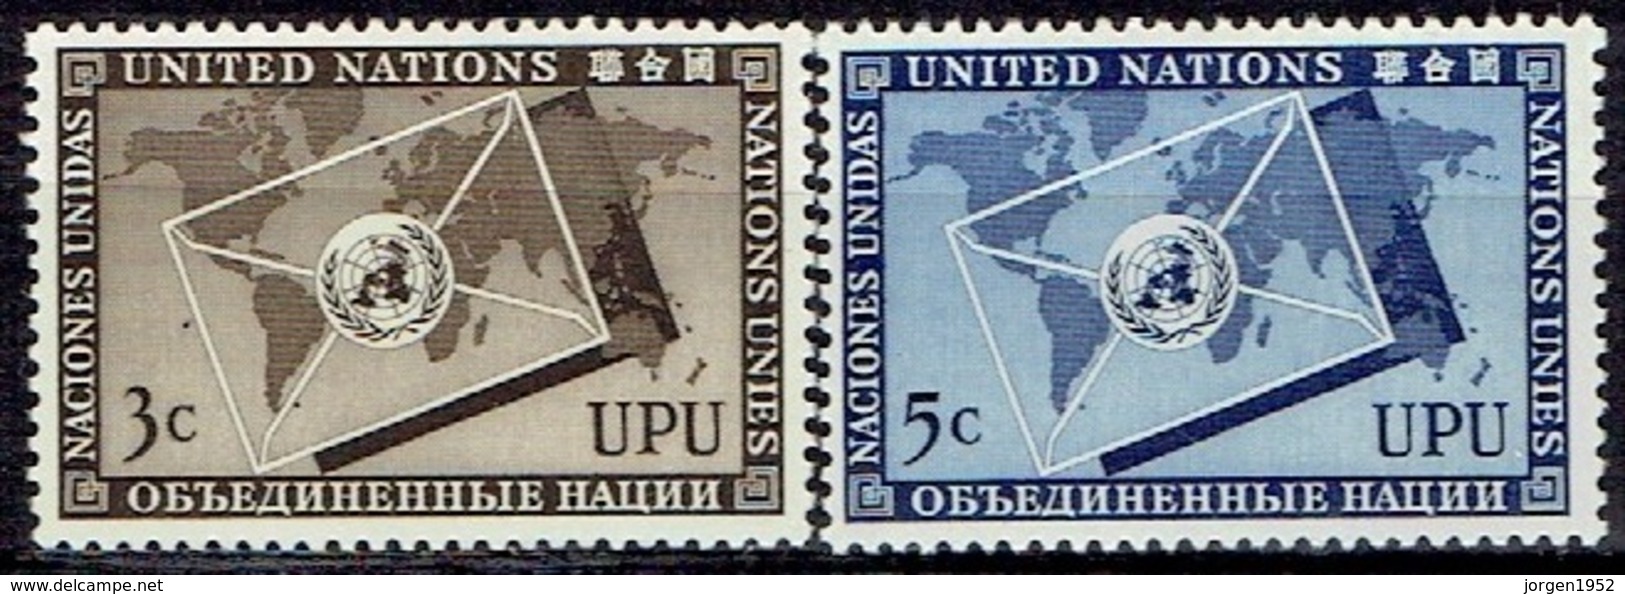 UNITED NATIONS # NEW YORK FROM 1953 STAMPWORLD 21-22* - Nuevos